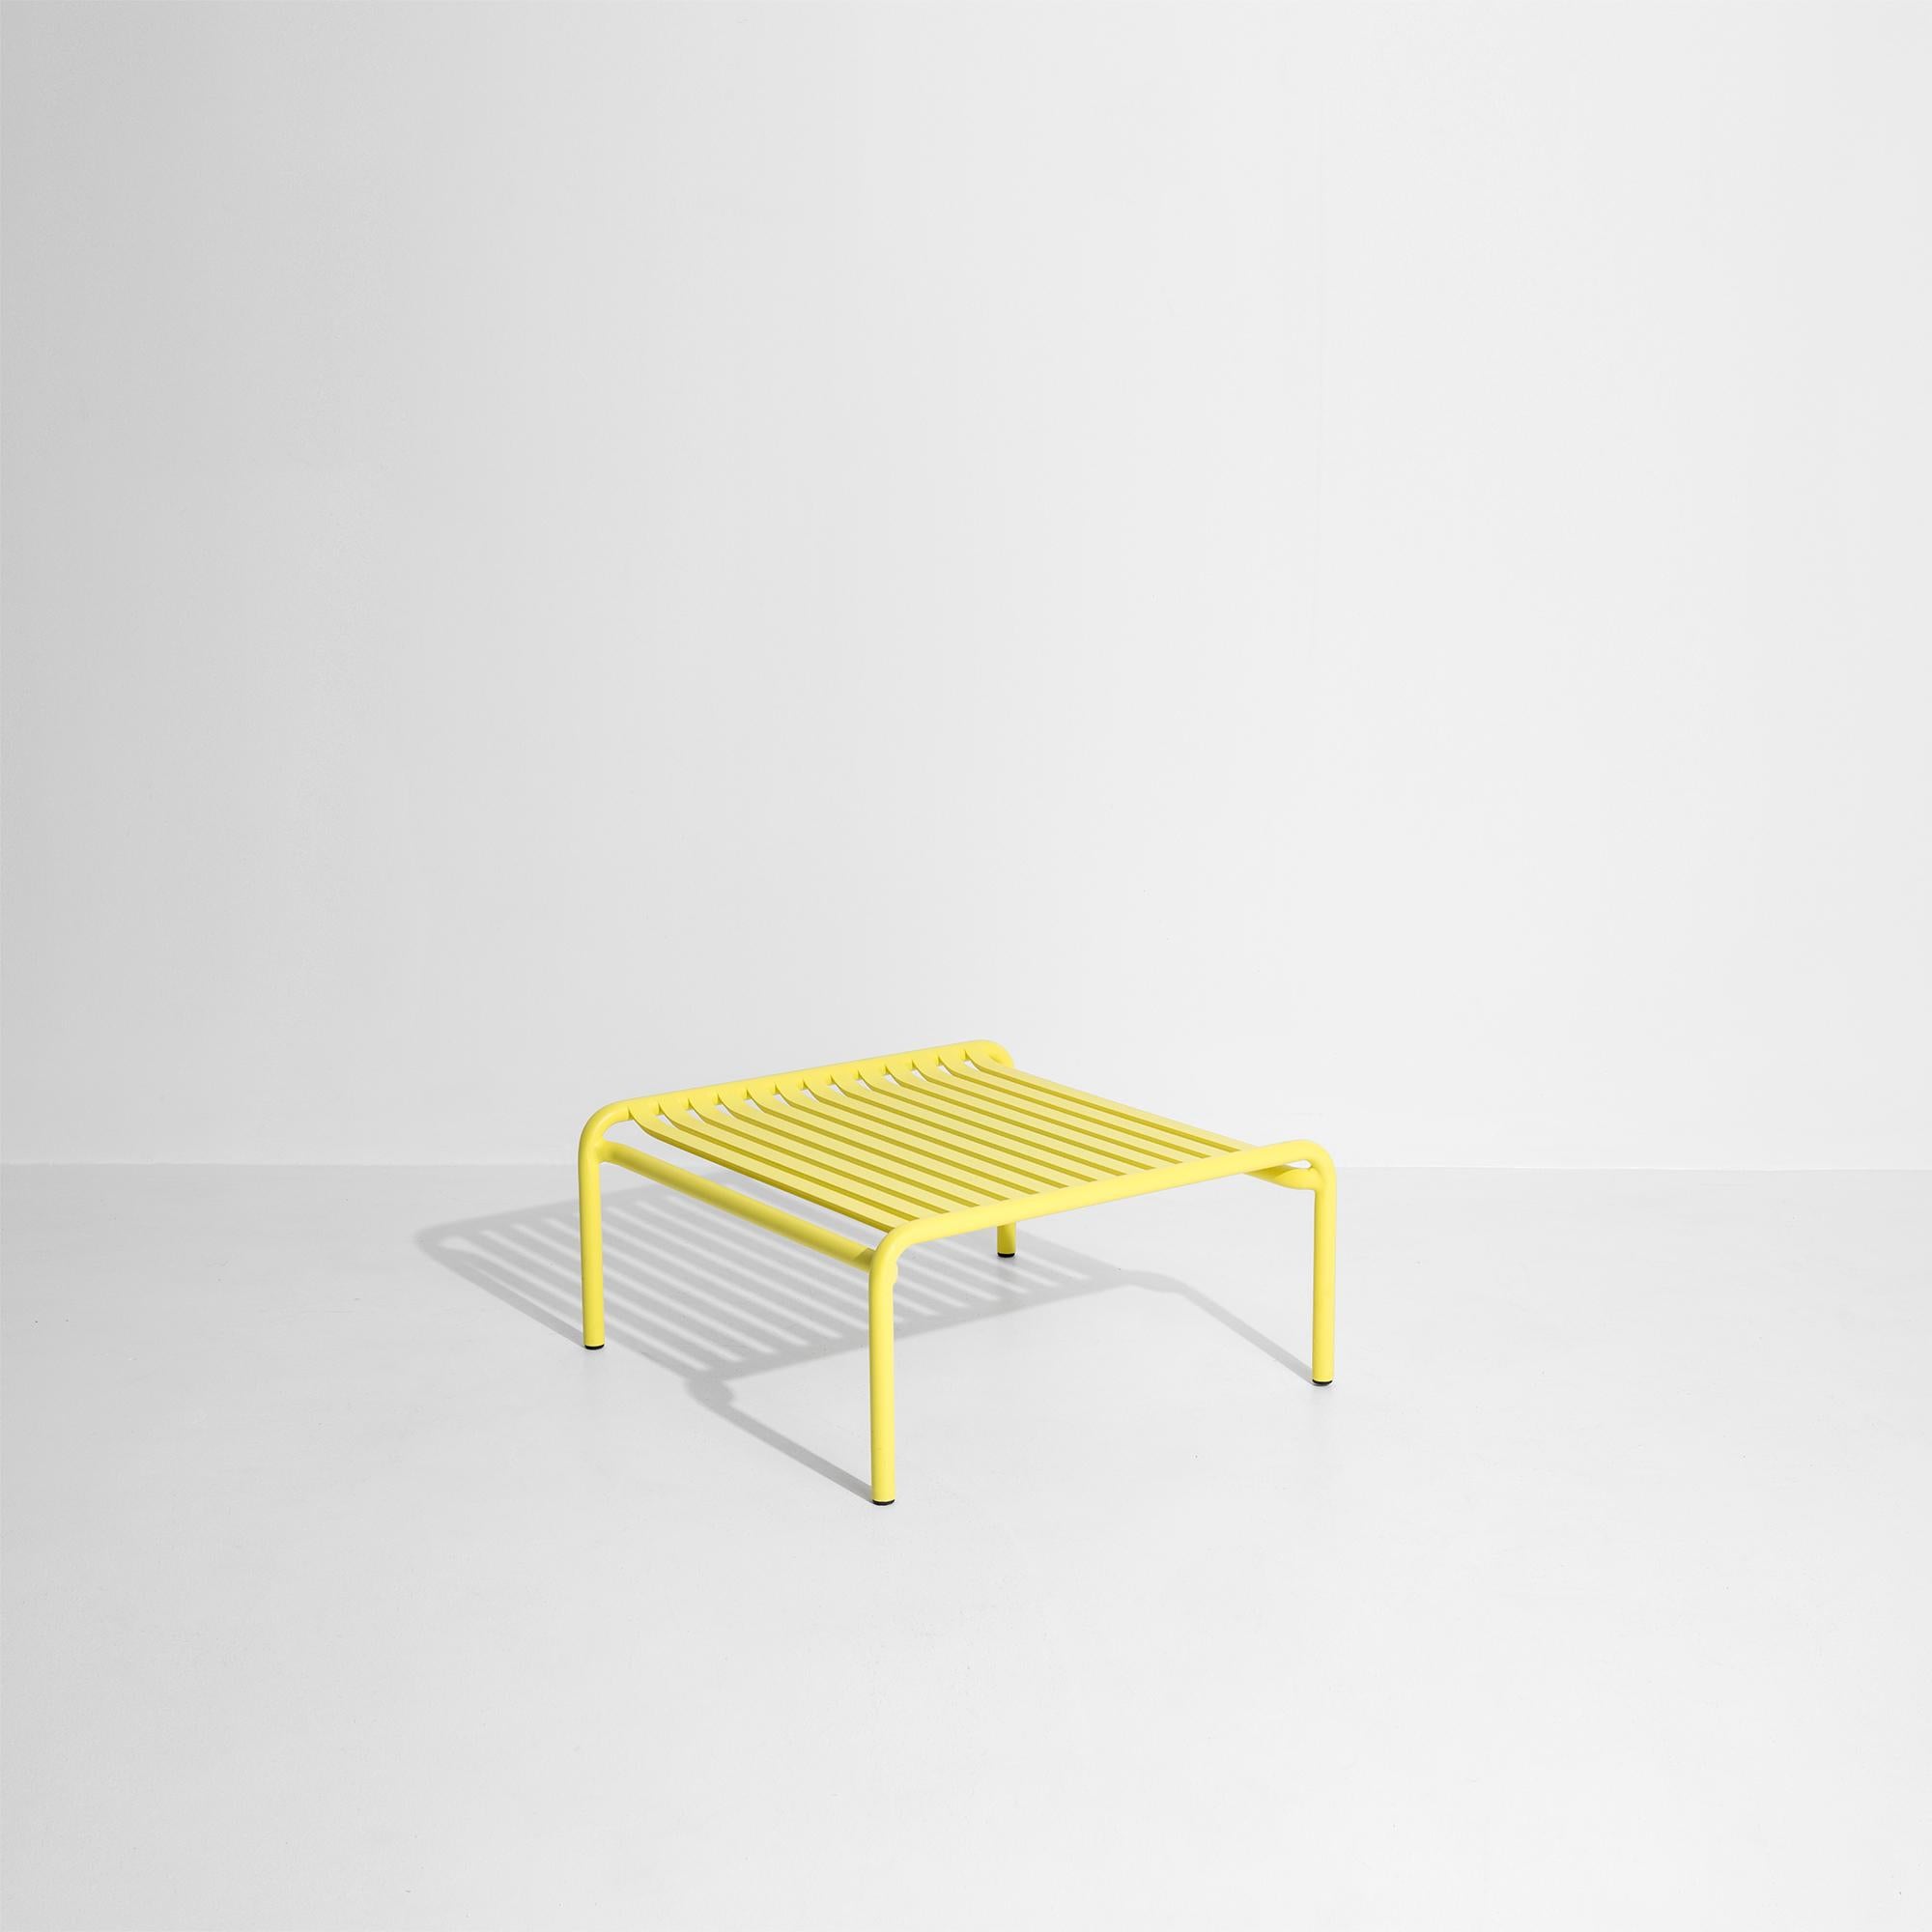 Chinese Petite Friture Week-End Coffee Table in Yellow Aluminium, 2017 For Sale